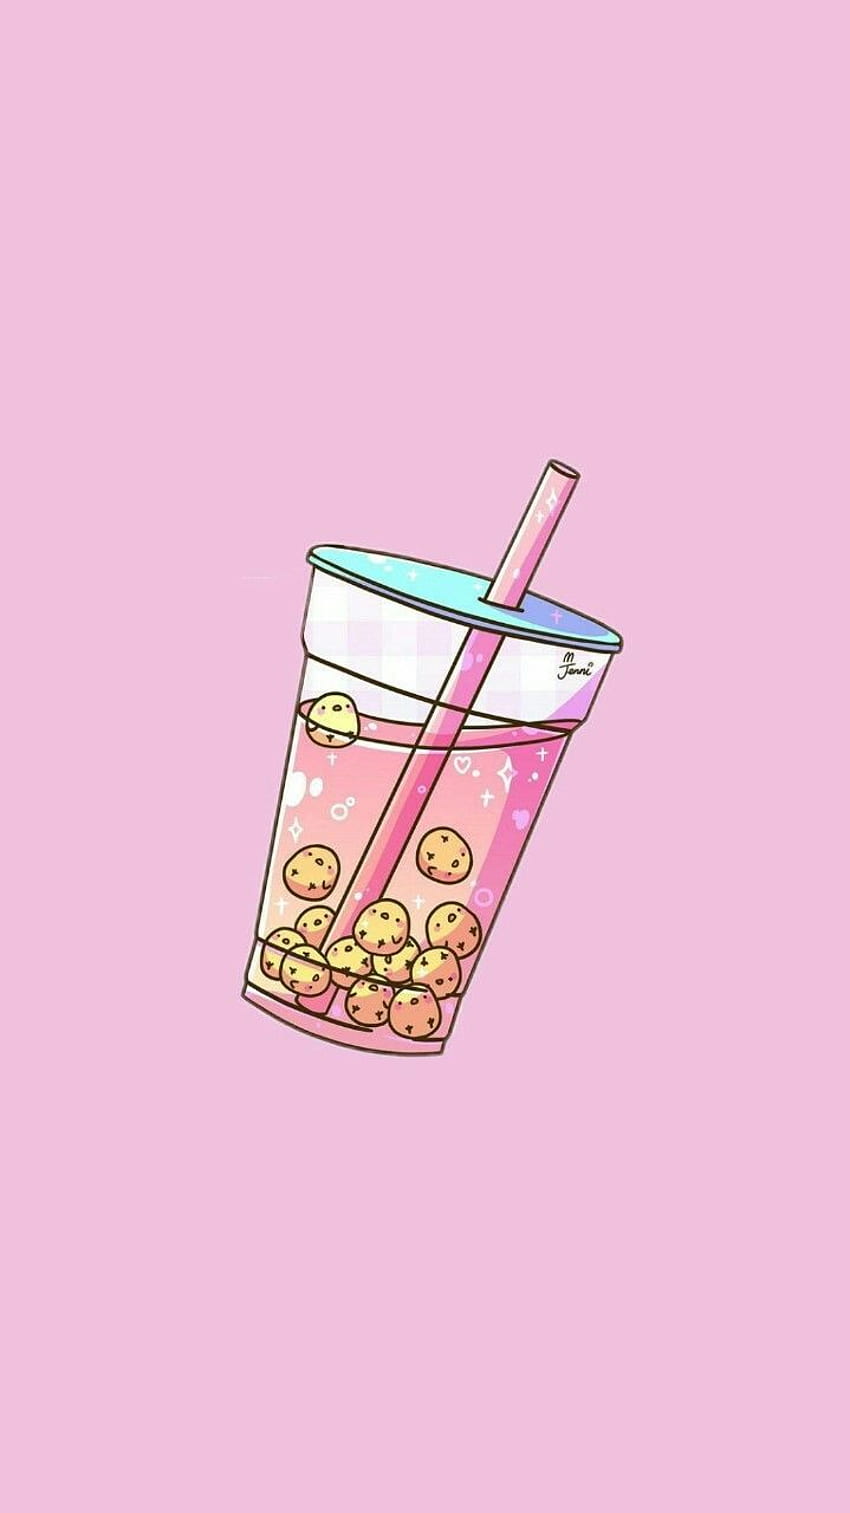 Bubble tea with cookie balls in a pink background - Boba